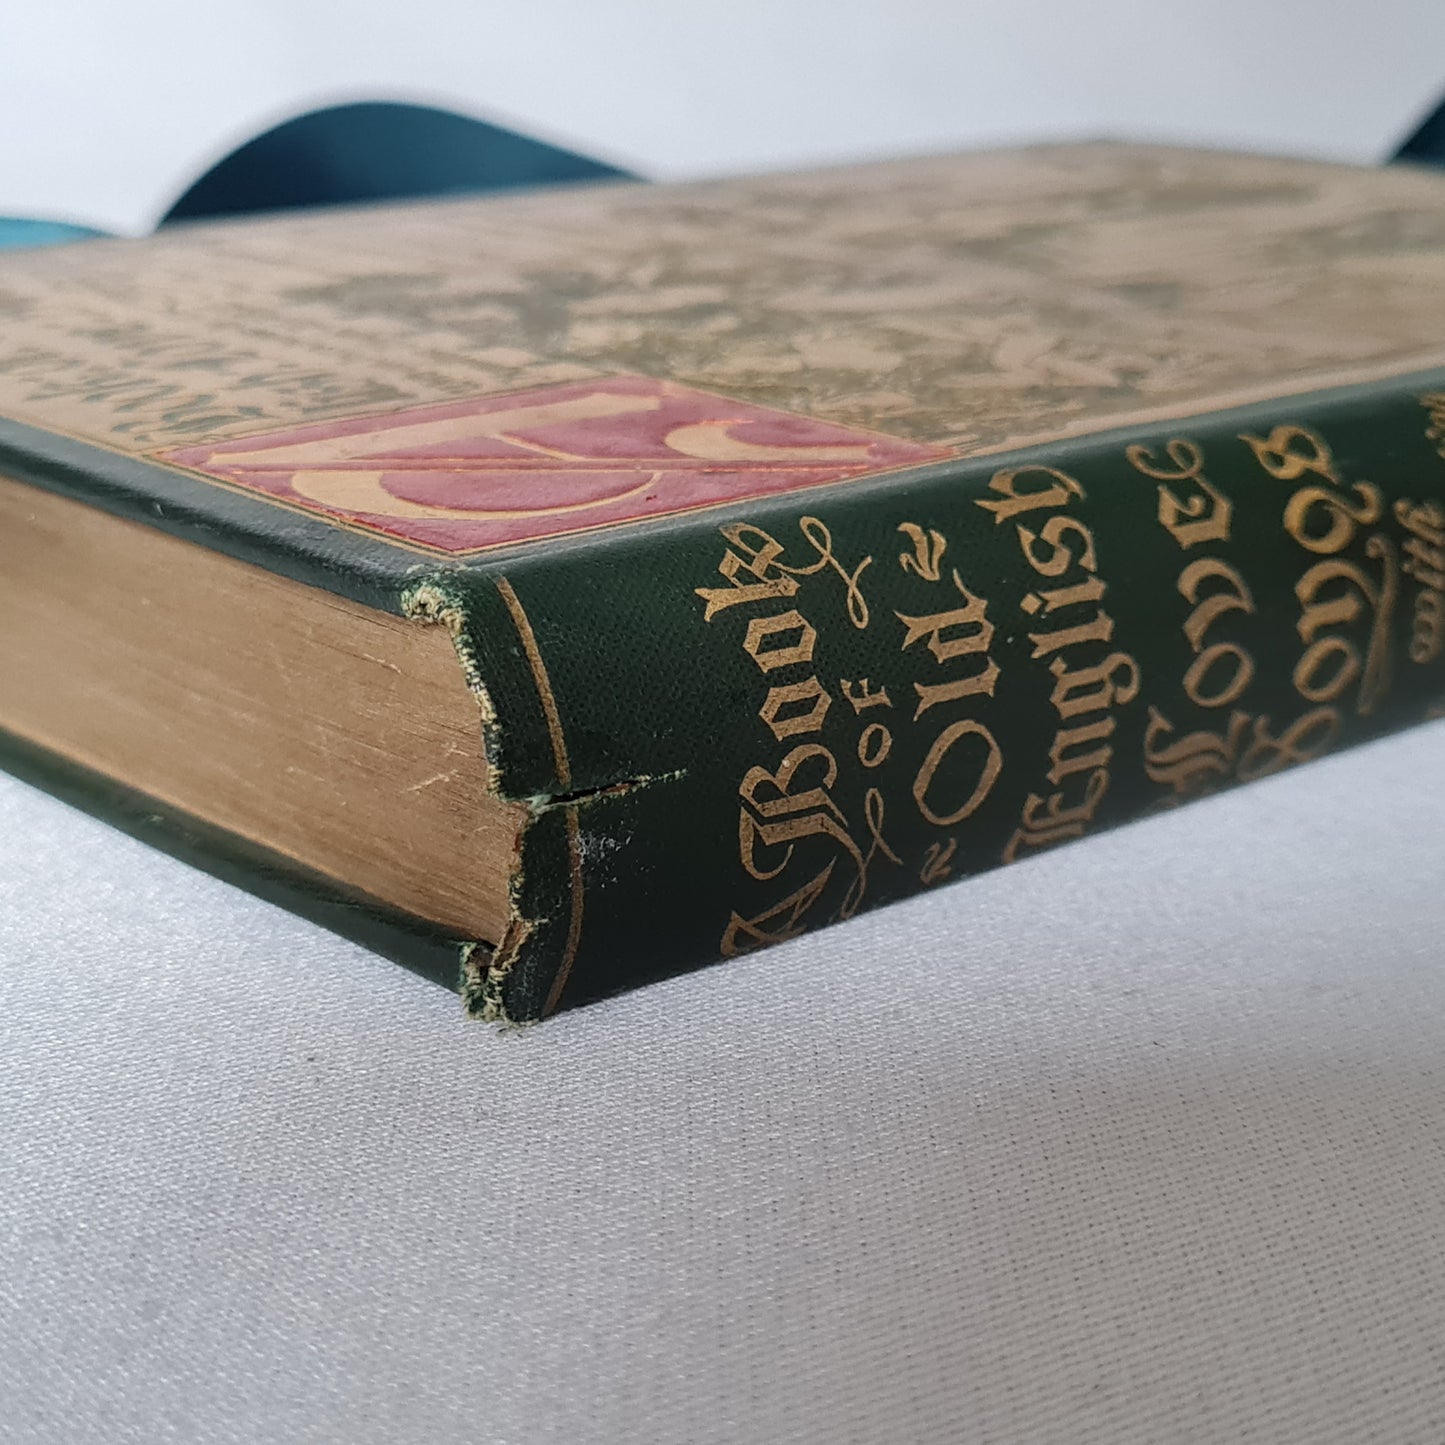 1897 A Book of Old English Love Songs / Macmillan, New York / Absolutely Beautiful Antique Book / Richly Decorated by George Wharton Edwards